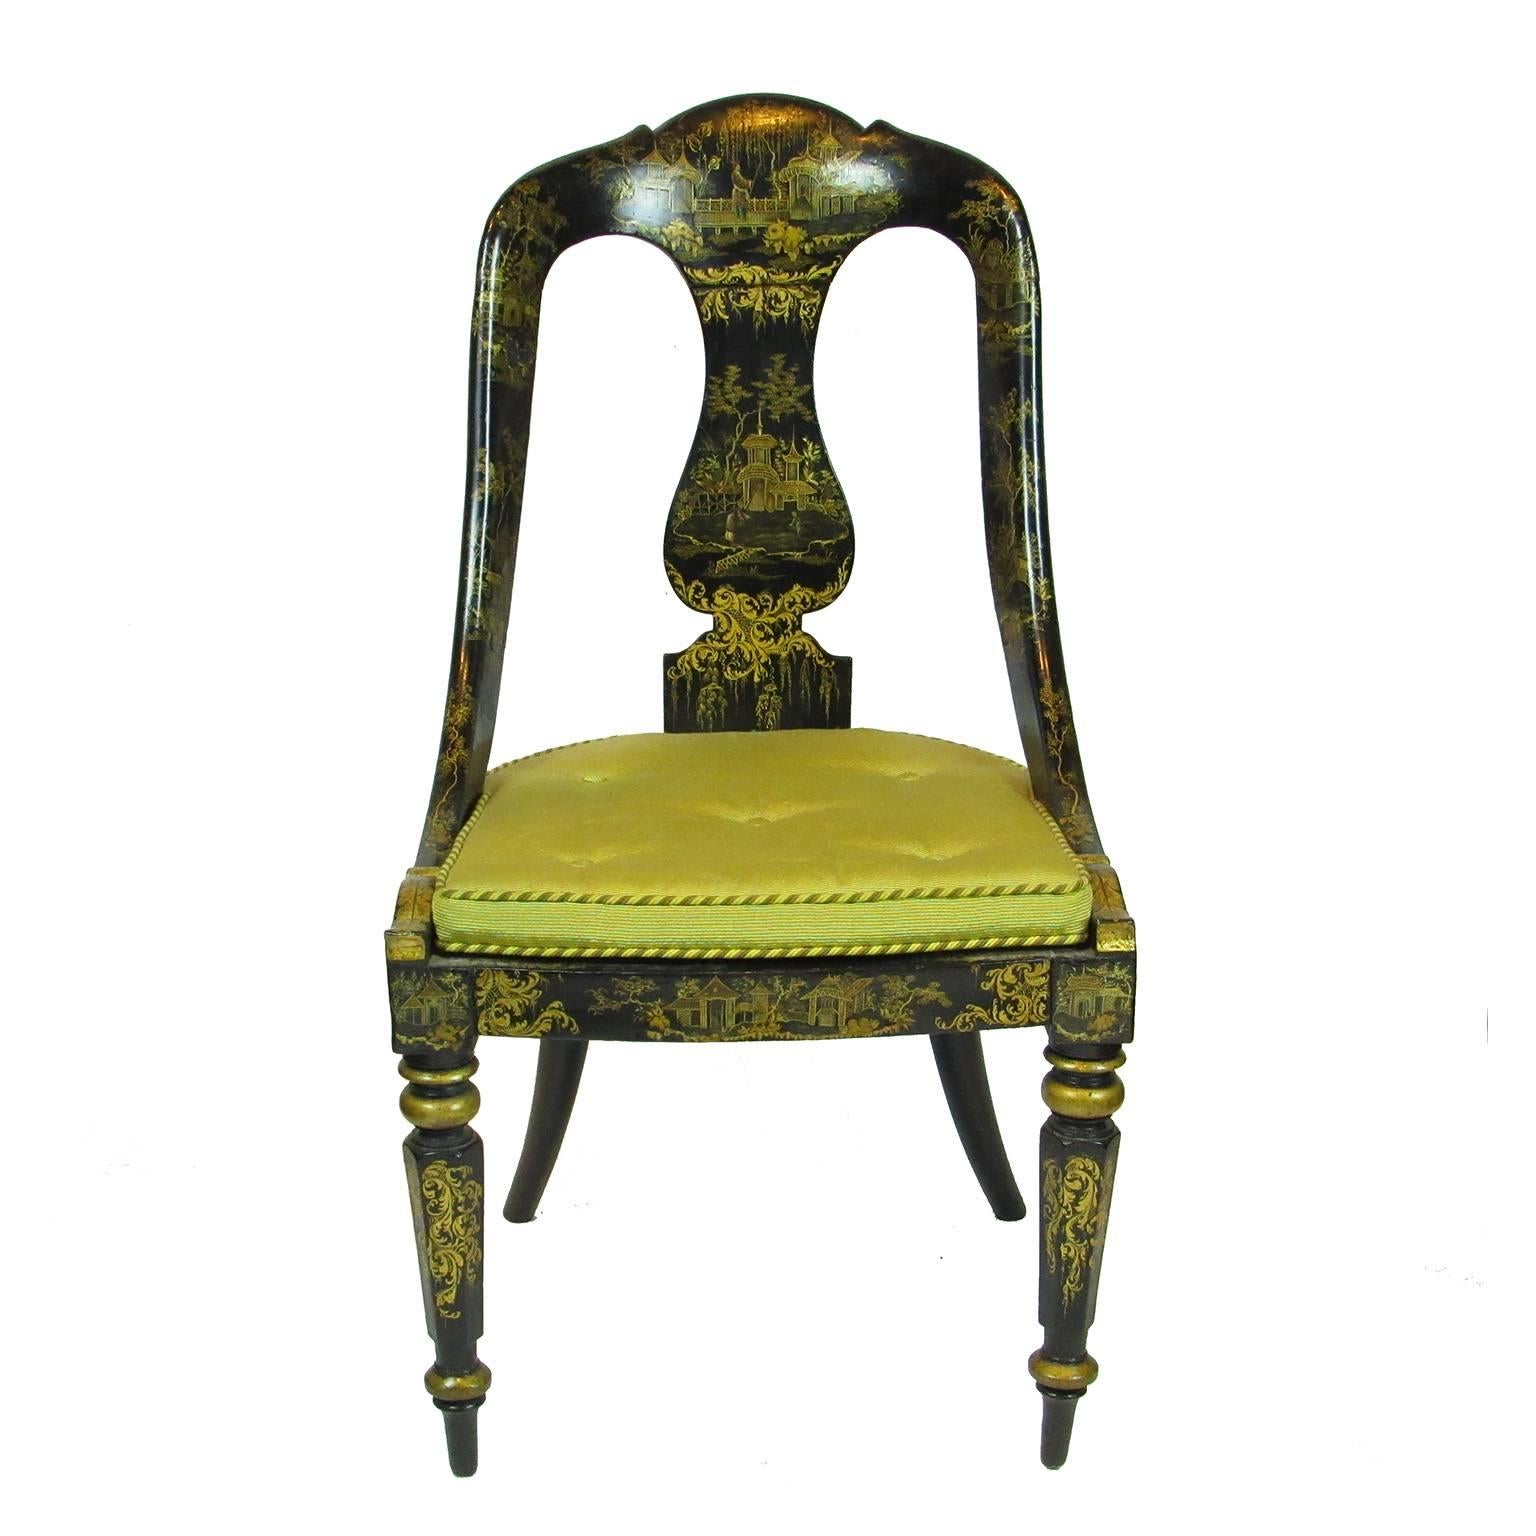 English Pair of Regency Japanned and Gilt Decorated Cane Seat Chairs